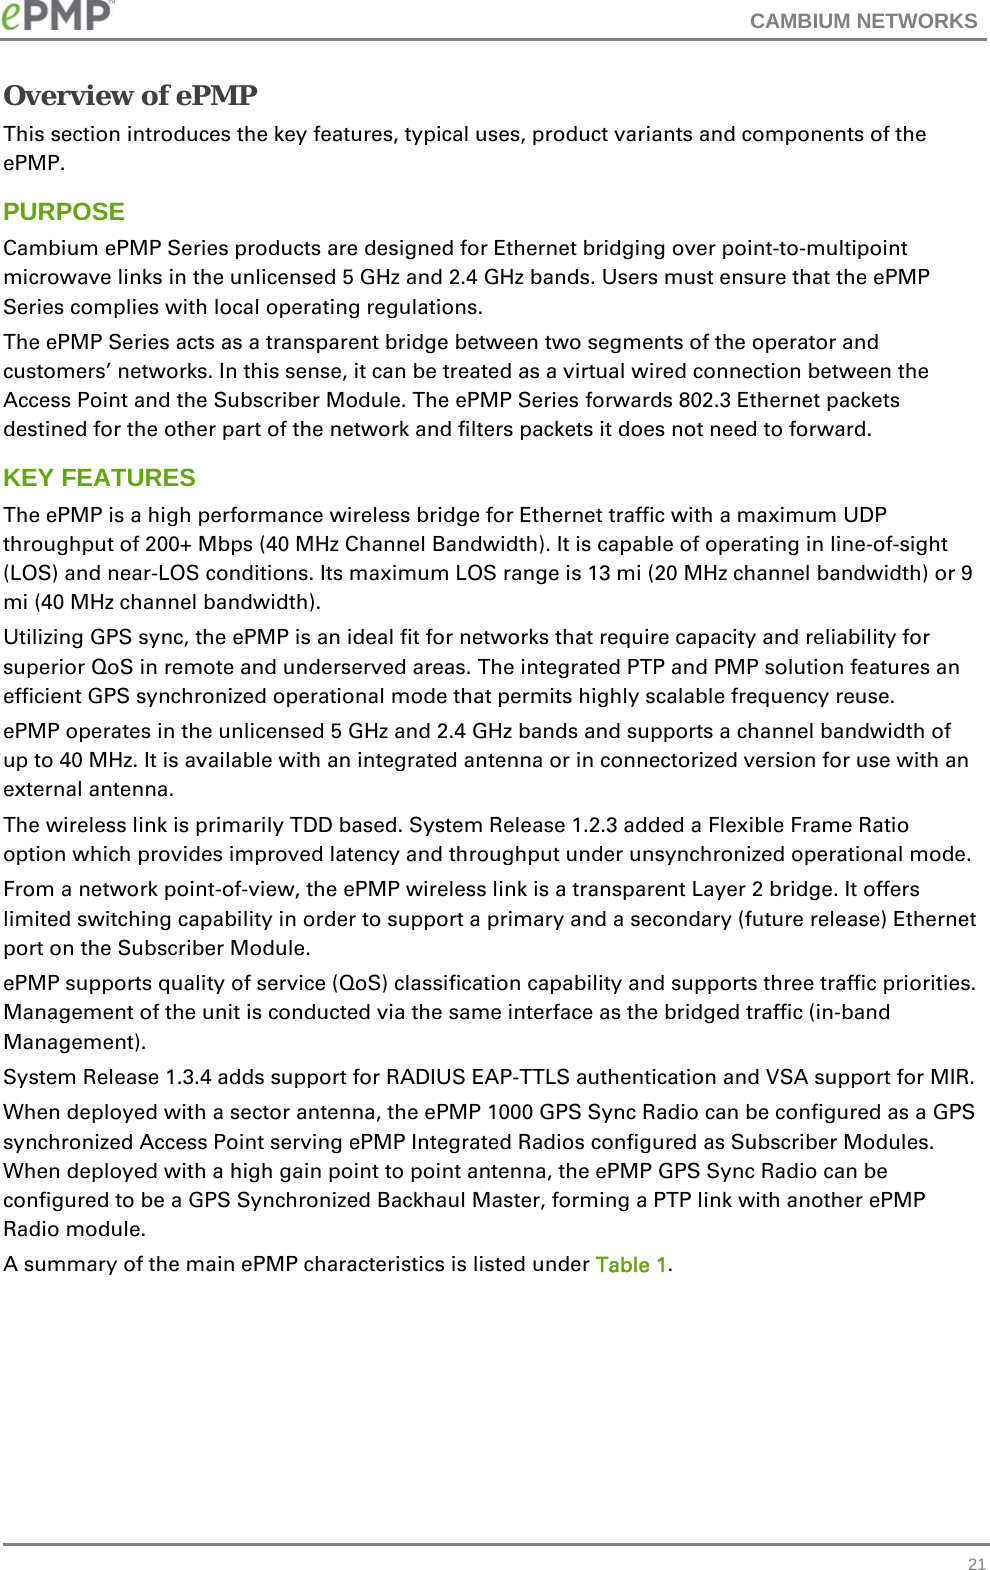 CAMBIUM NETWORKS   21Overview of ePMP This section introduces the key features, typical uses, product variants and components of the ePMP. PURPOSE Cambium ePMP Series products are designed for Ethernet bridging over point-to-multipoint microwave links in the unlicensed 5 GHz and 2.4 GHz bands. Users must ensure that the ePMP Series complies with local operating regulations. The ePMP Series acts as a transparent bridge between two segments of the operator and customers’ networks. In this sense, it can be treated as a virtual wired connection between the Access Point and the Subscriber Module. The ePMP Series forwards 802.3 Ethernet packets destined for the other part of the network and filters packets it does not need to forward.  KEY FEATURES The ePMP is a high performance wireless bridge for Ethernet traffic with a maximum UDP throughput of 200+ Mbps (40 MHz Channel Bandwidth). It is capable of operating in line-of-sight (LOS) and near-LOS conditions. Its maximum LOS range is 13 mi (20 MHz channel bandwidth) or 9 mi (40 MHz channel bandwidth). Utilizing GPS sync, the ePMP is an ideal fit for networks that require capacity and reliability for superior QoS in remote and underserved areas. The integrated PTP and PMP solution features an efficient GPS synchronized operational mode that permits highly scalable frequency reuse. ePMP operates in the unlicensed 5 GHz and 2.4 GHz bands and supports a channel bandwidth of up to 40 MHz. It is available with an integrated antenna or in connectorized version for use with an external antenna. The wireless link is primarily TDD based. System Release 1.2.3 added a Flexible Frame Ratio option which provides improved latency and throughput under unsynchronized operational mode.  From a network point-of-view, the ePMP wireless link is a transparent Layer 2 bridge. It offers limited switching capability in order to support a primary and a secondary (future release) Ethernet port on the Subscriber Module. ePMP supports quality of service (QoS) classification capability and supports three traffic priorities. Management of the unit is conducted via the same interface as the bridged traffic (in-band Management). System Release 1.3.4 adds support for RADIUS EAP-TTLS authentication and VSA support for MIR.  When deployed with a sector antenna, the ePMP 1000 GPS Sync Radio can be configured as a GPS synchronized Access Point serving ePMP Integrated Radios configured as Subscriber Modules. When deployed with a high gain point to point antenna, the ePMP GPS Sync Radio can be configured to be a GPS Synchronized Backhaul Master, forming a PTP link with another ePMP Radio module. A summary of the main ePMP characteristics is listed under Table 1. 